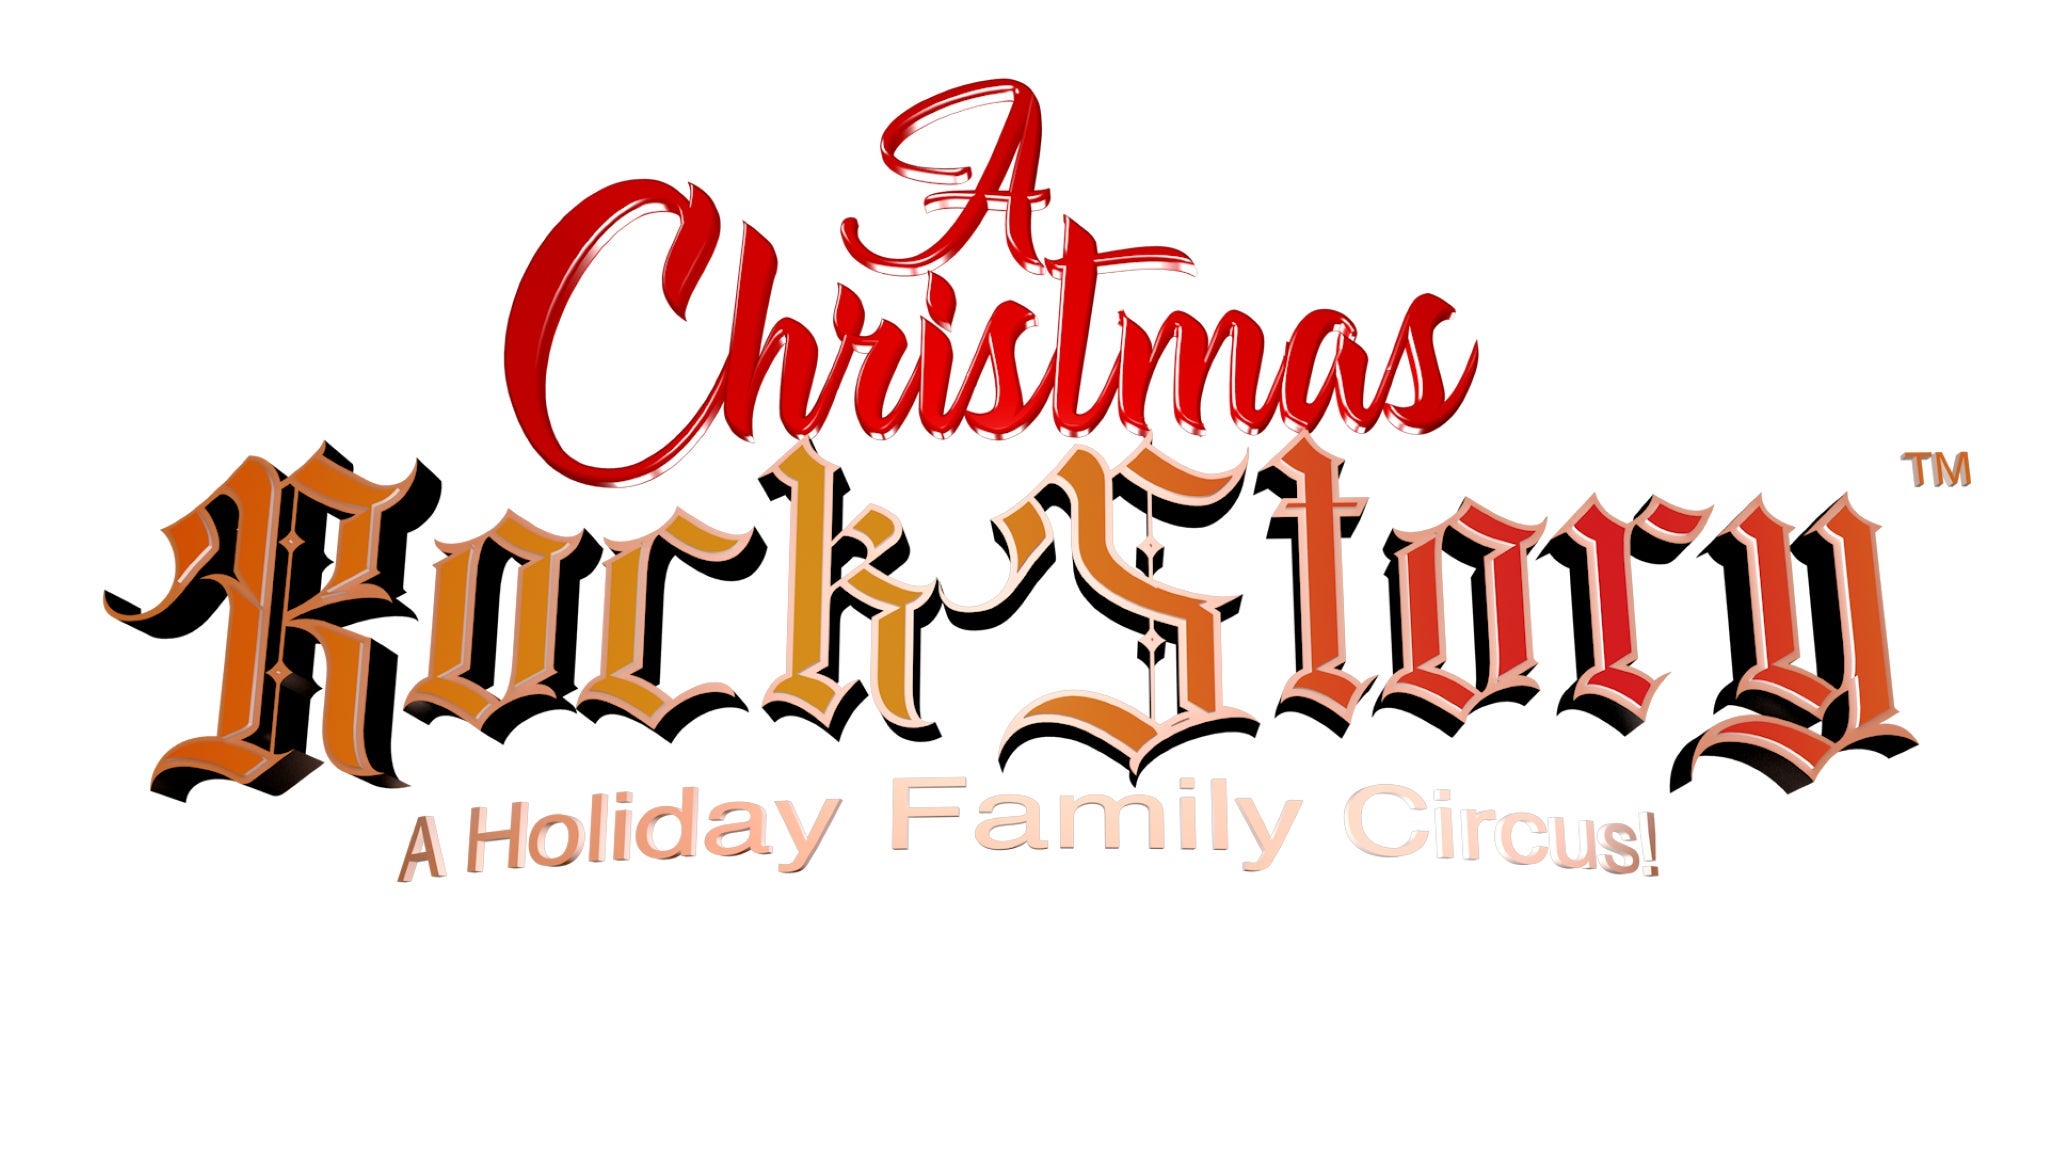 A Christmas Rock Story: A Holiday Circus Spectacular in Tsuut'ina promo photo for Promotor Pressale presale offer code